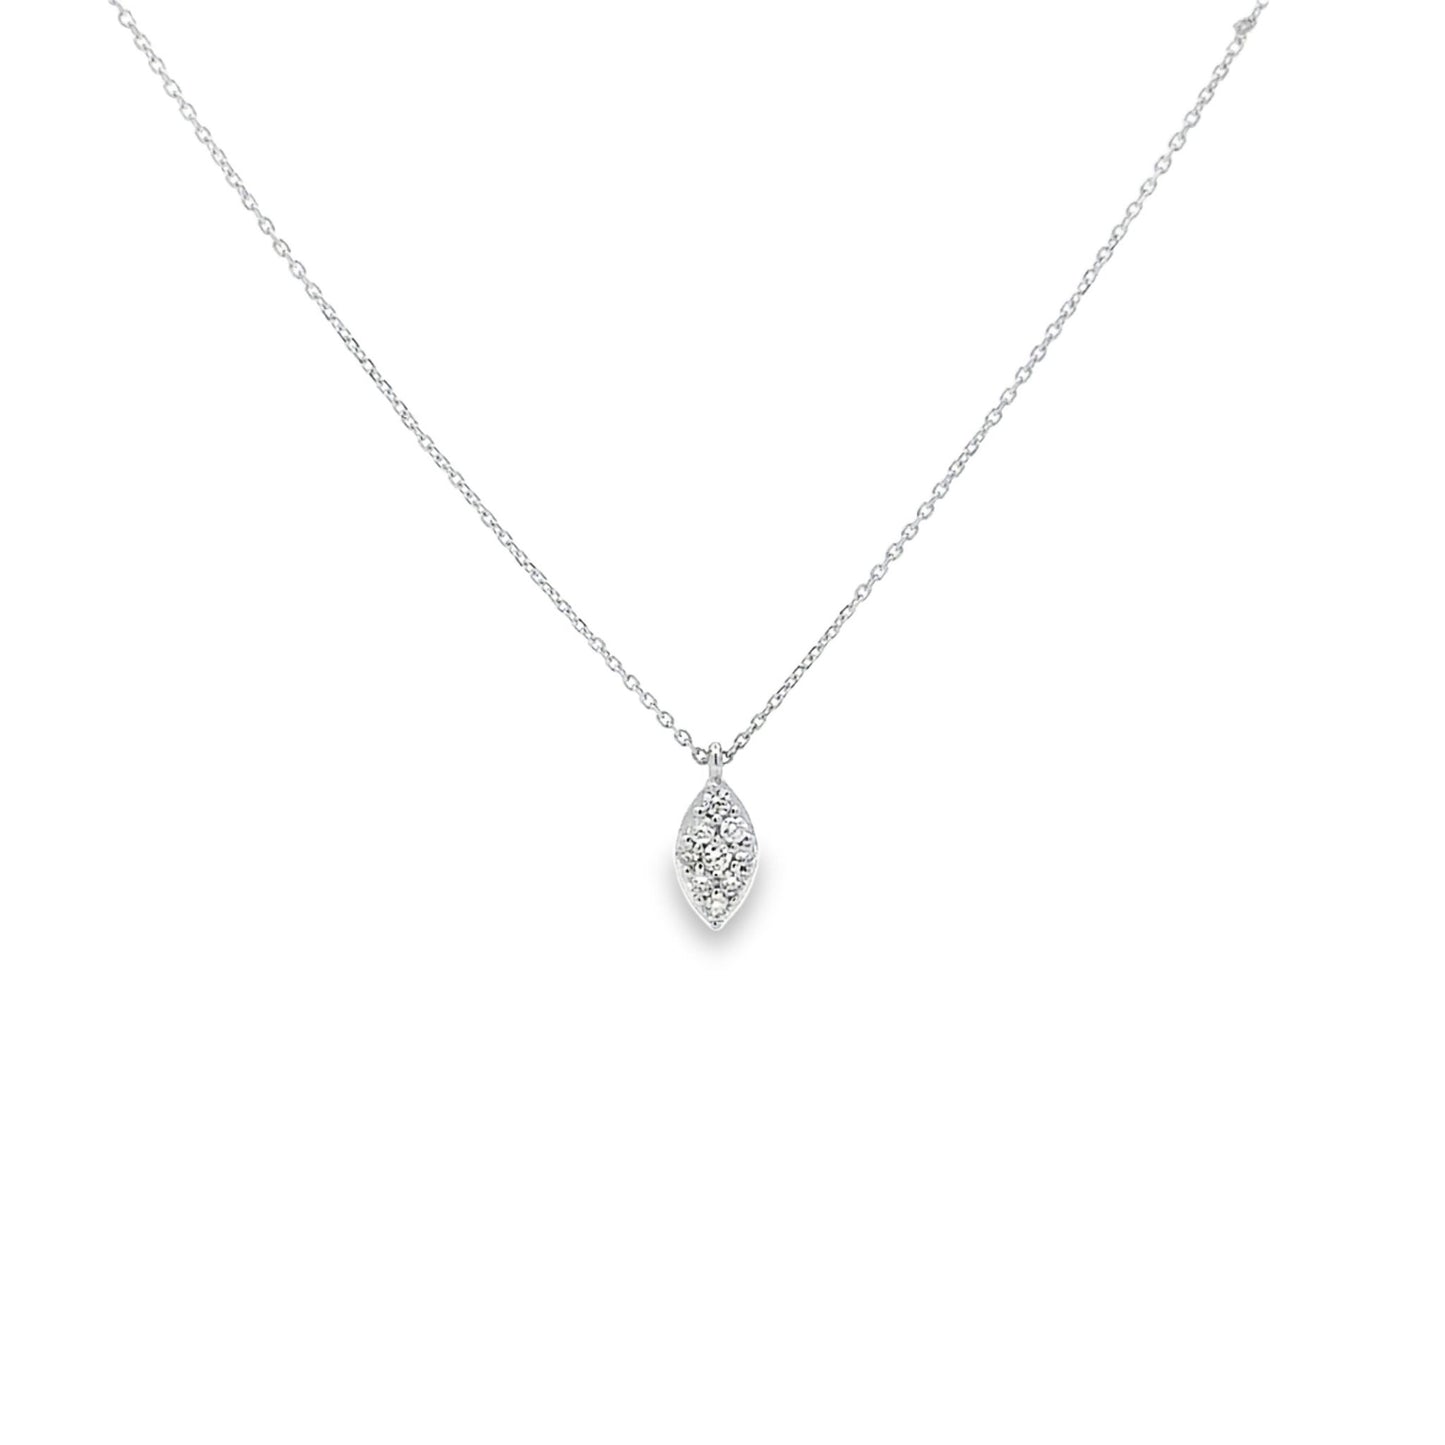 SPARKLING PEAR SHAPED NECKLACE